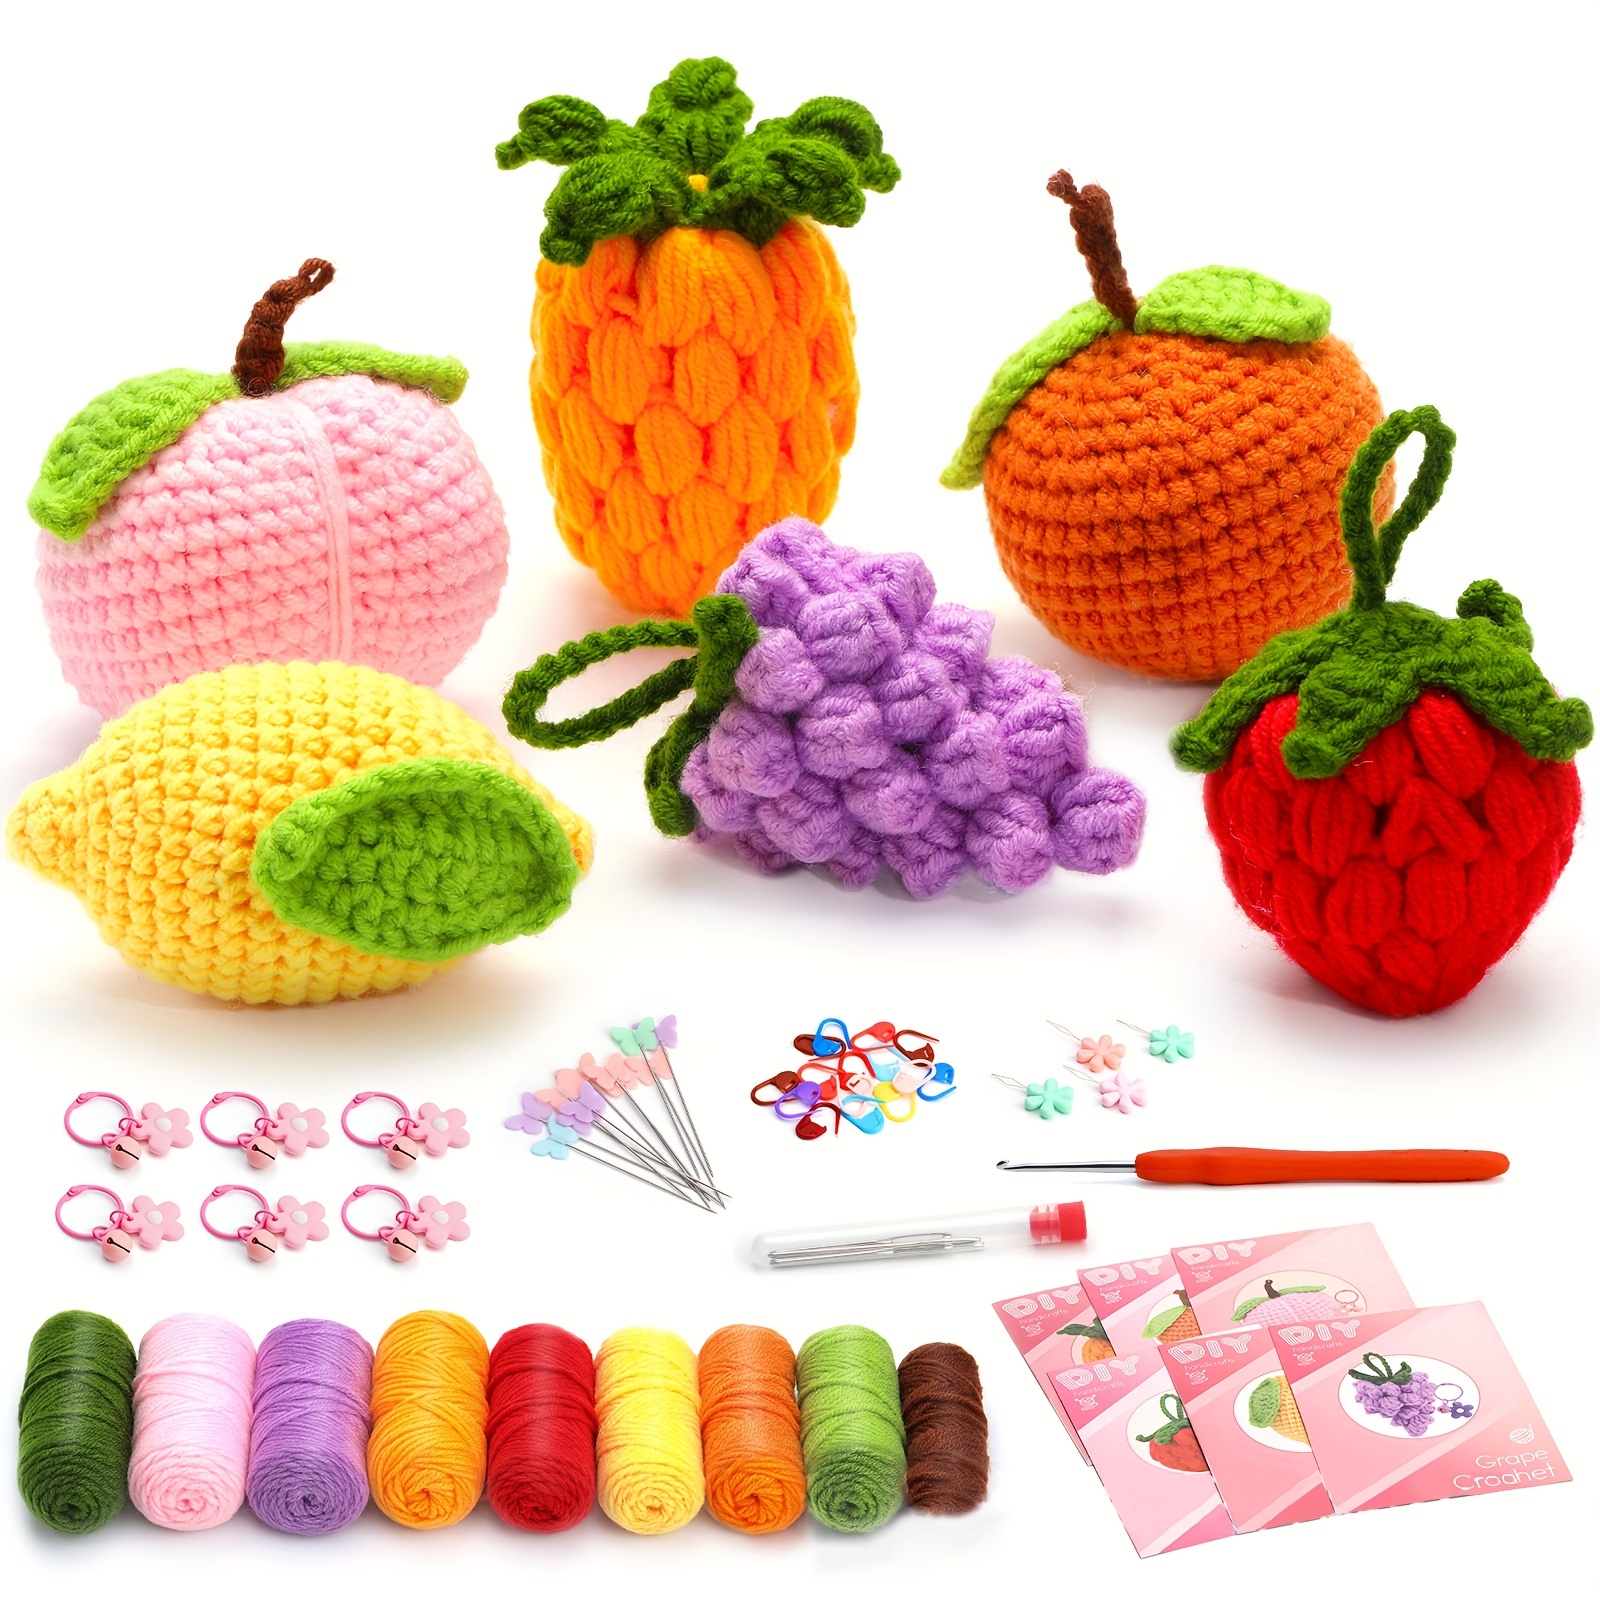 Crochet Kit For Beginners Crochet Animals Kit With Step-By-Step Video  Tutorials Crochet Kits For Adults And Kids - AliExpress